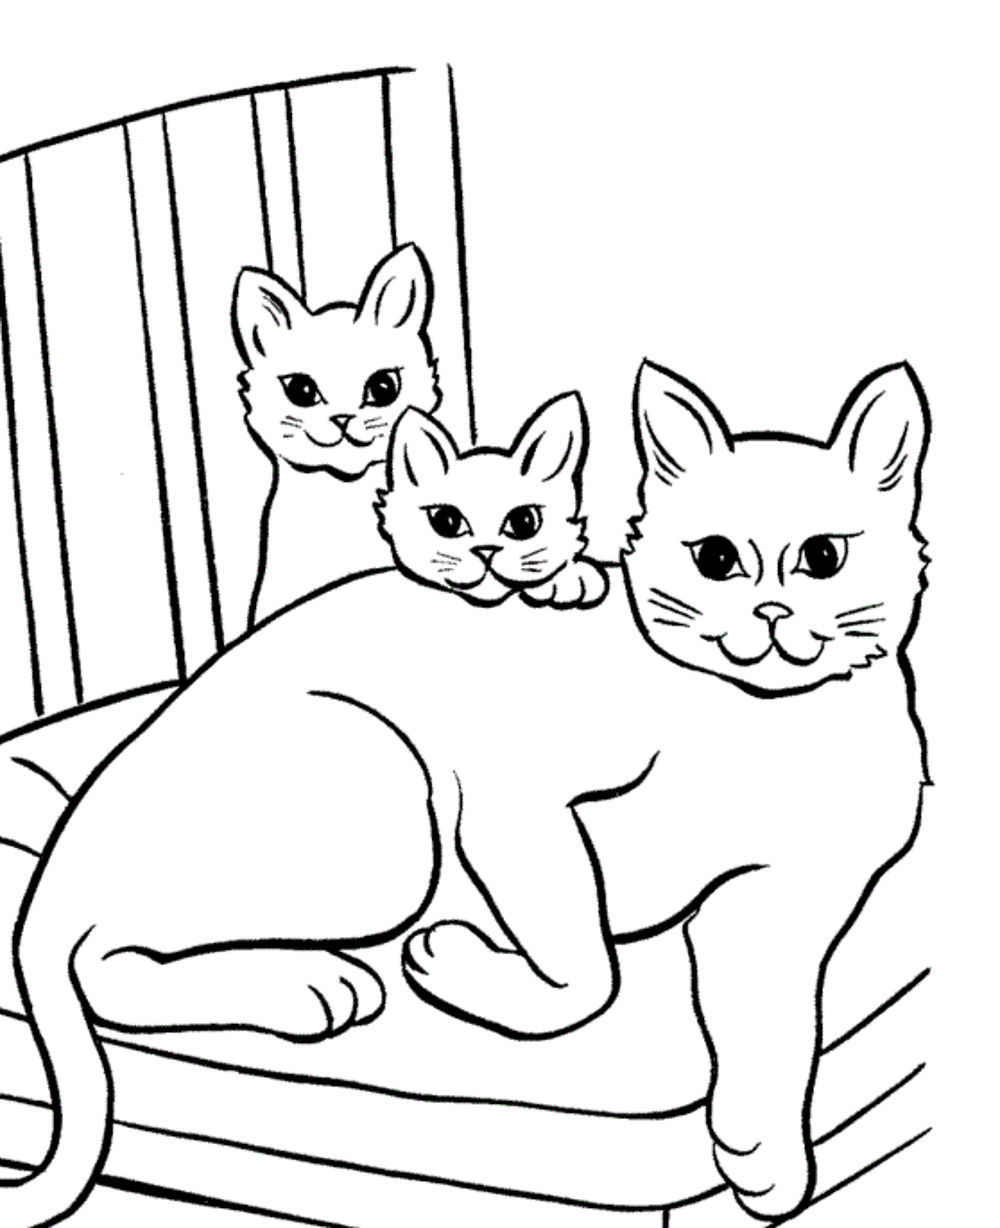 kitty-cat-coloring-pages-printable-coloring-pages